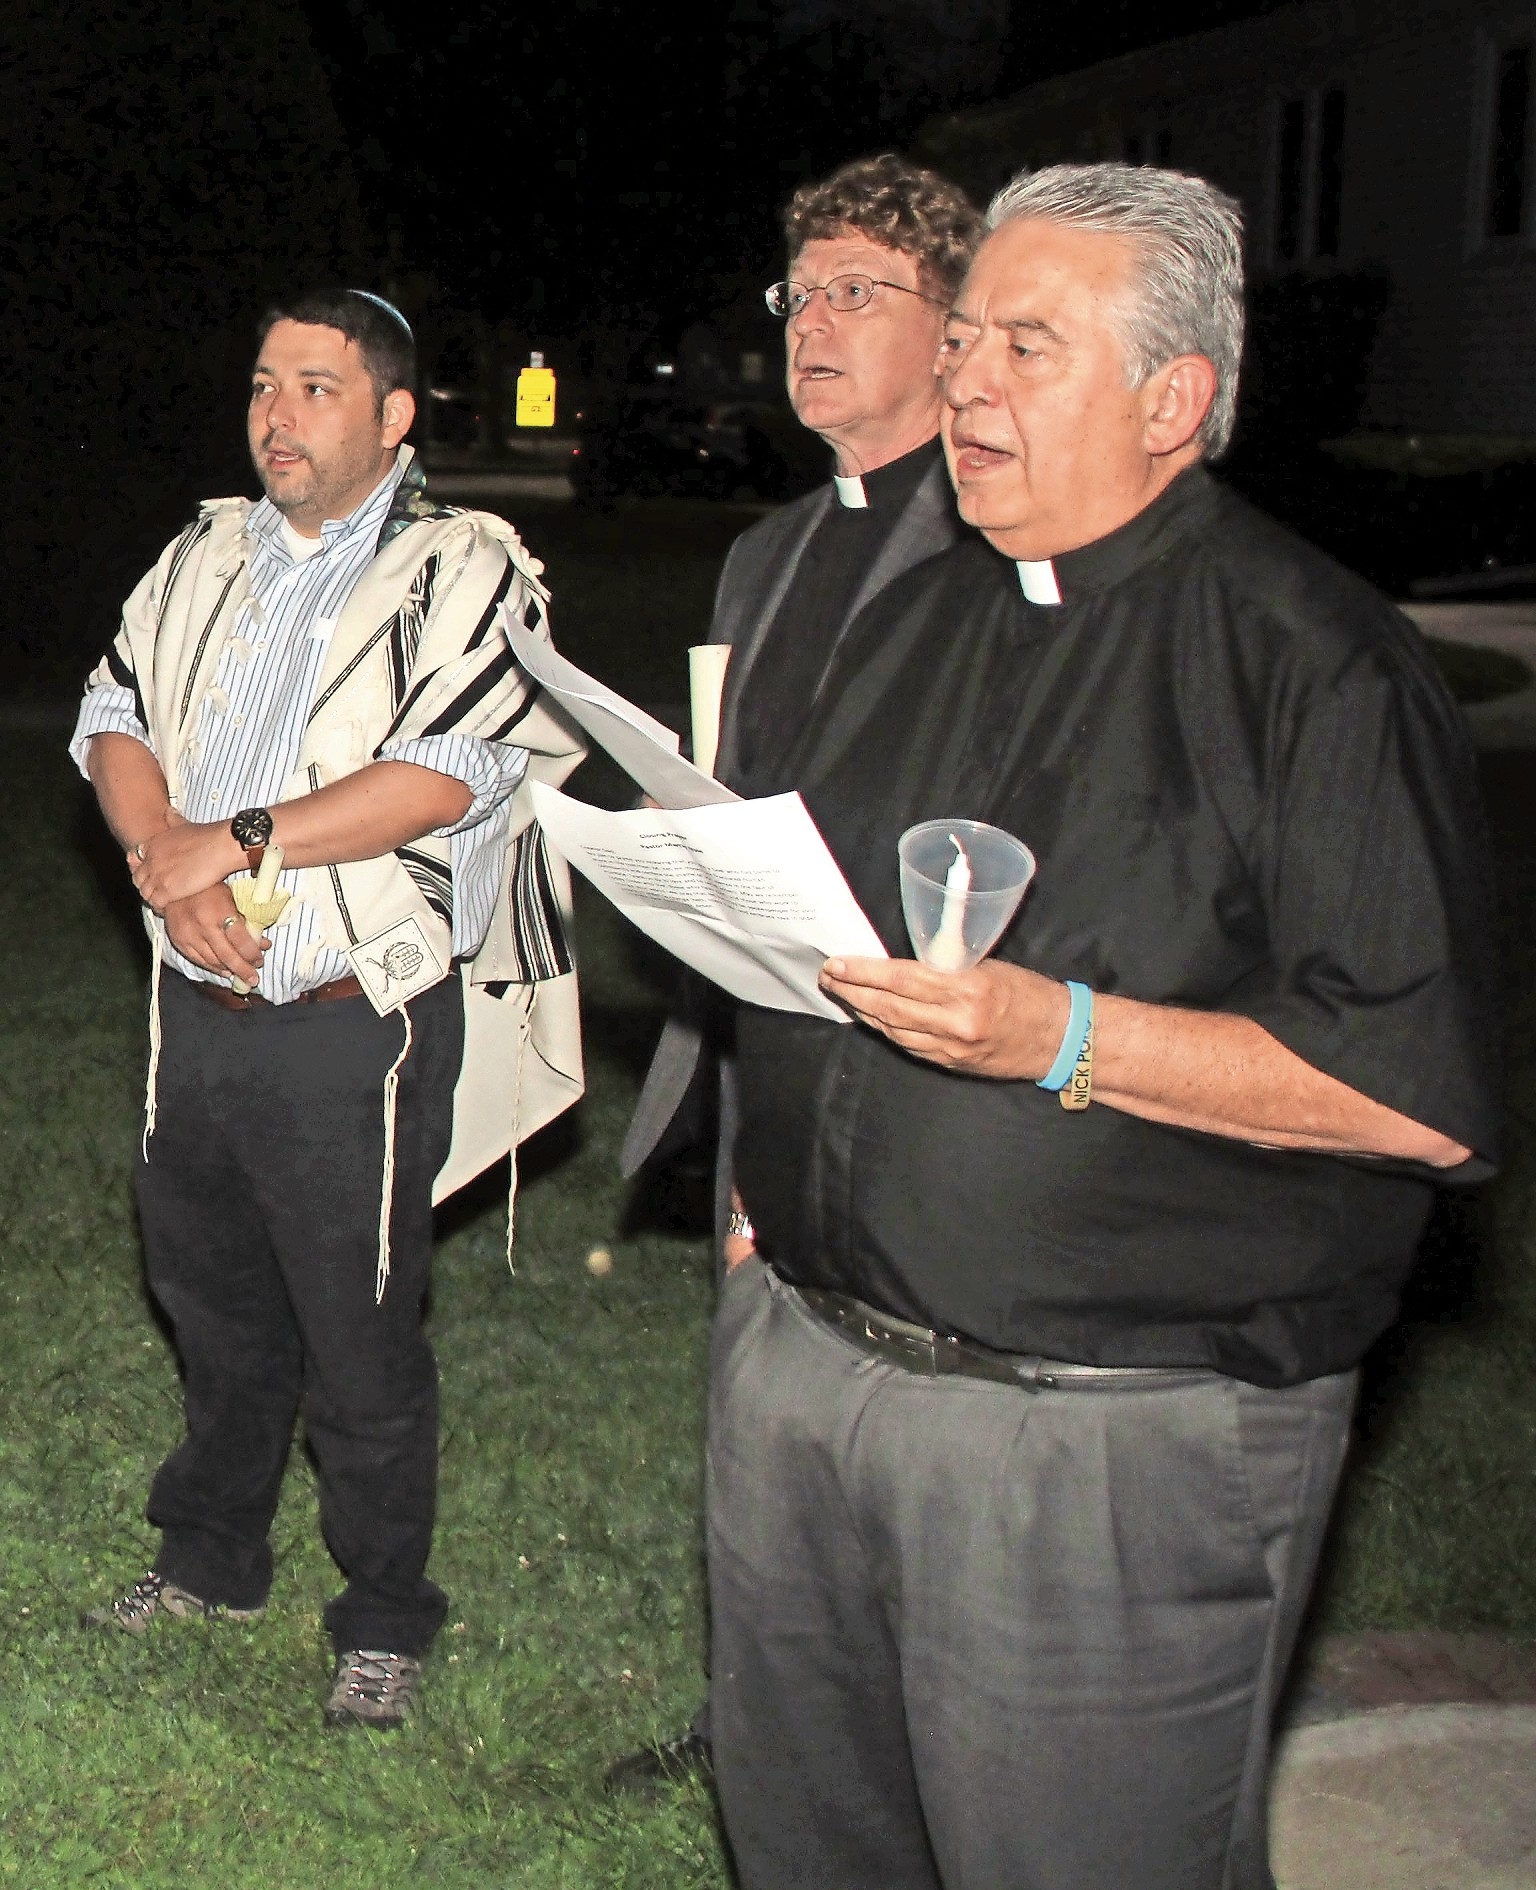 Rabbi Daniel Bar-Nahum, far left, of Temple Emanu-El of East Meadow; the Rev. Martin Nale, pastor of Christ Lutheran Church of Wantagh; and the Rev. Gregory Cappuccino, pastor of St. Frances de Chantal Roman Catholic Church, in Wantagh, sang the national anthem.